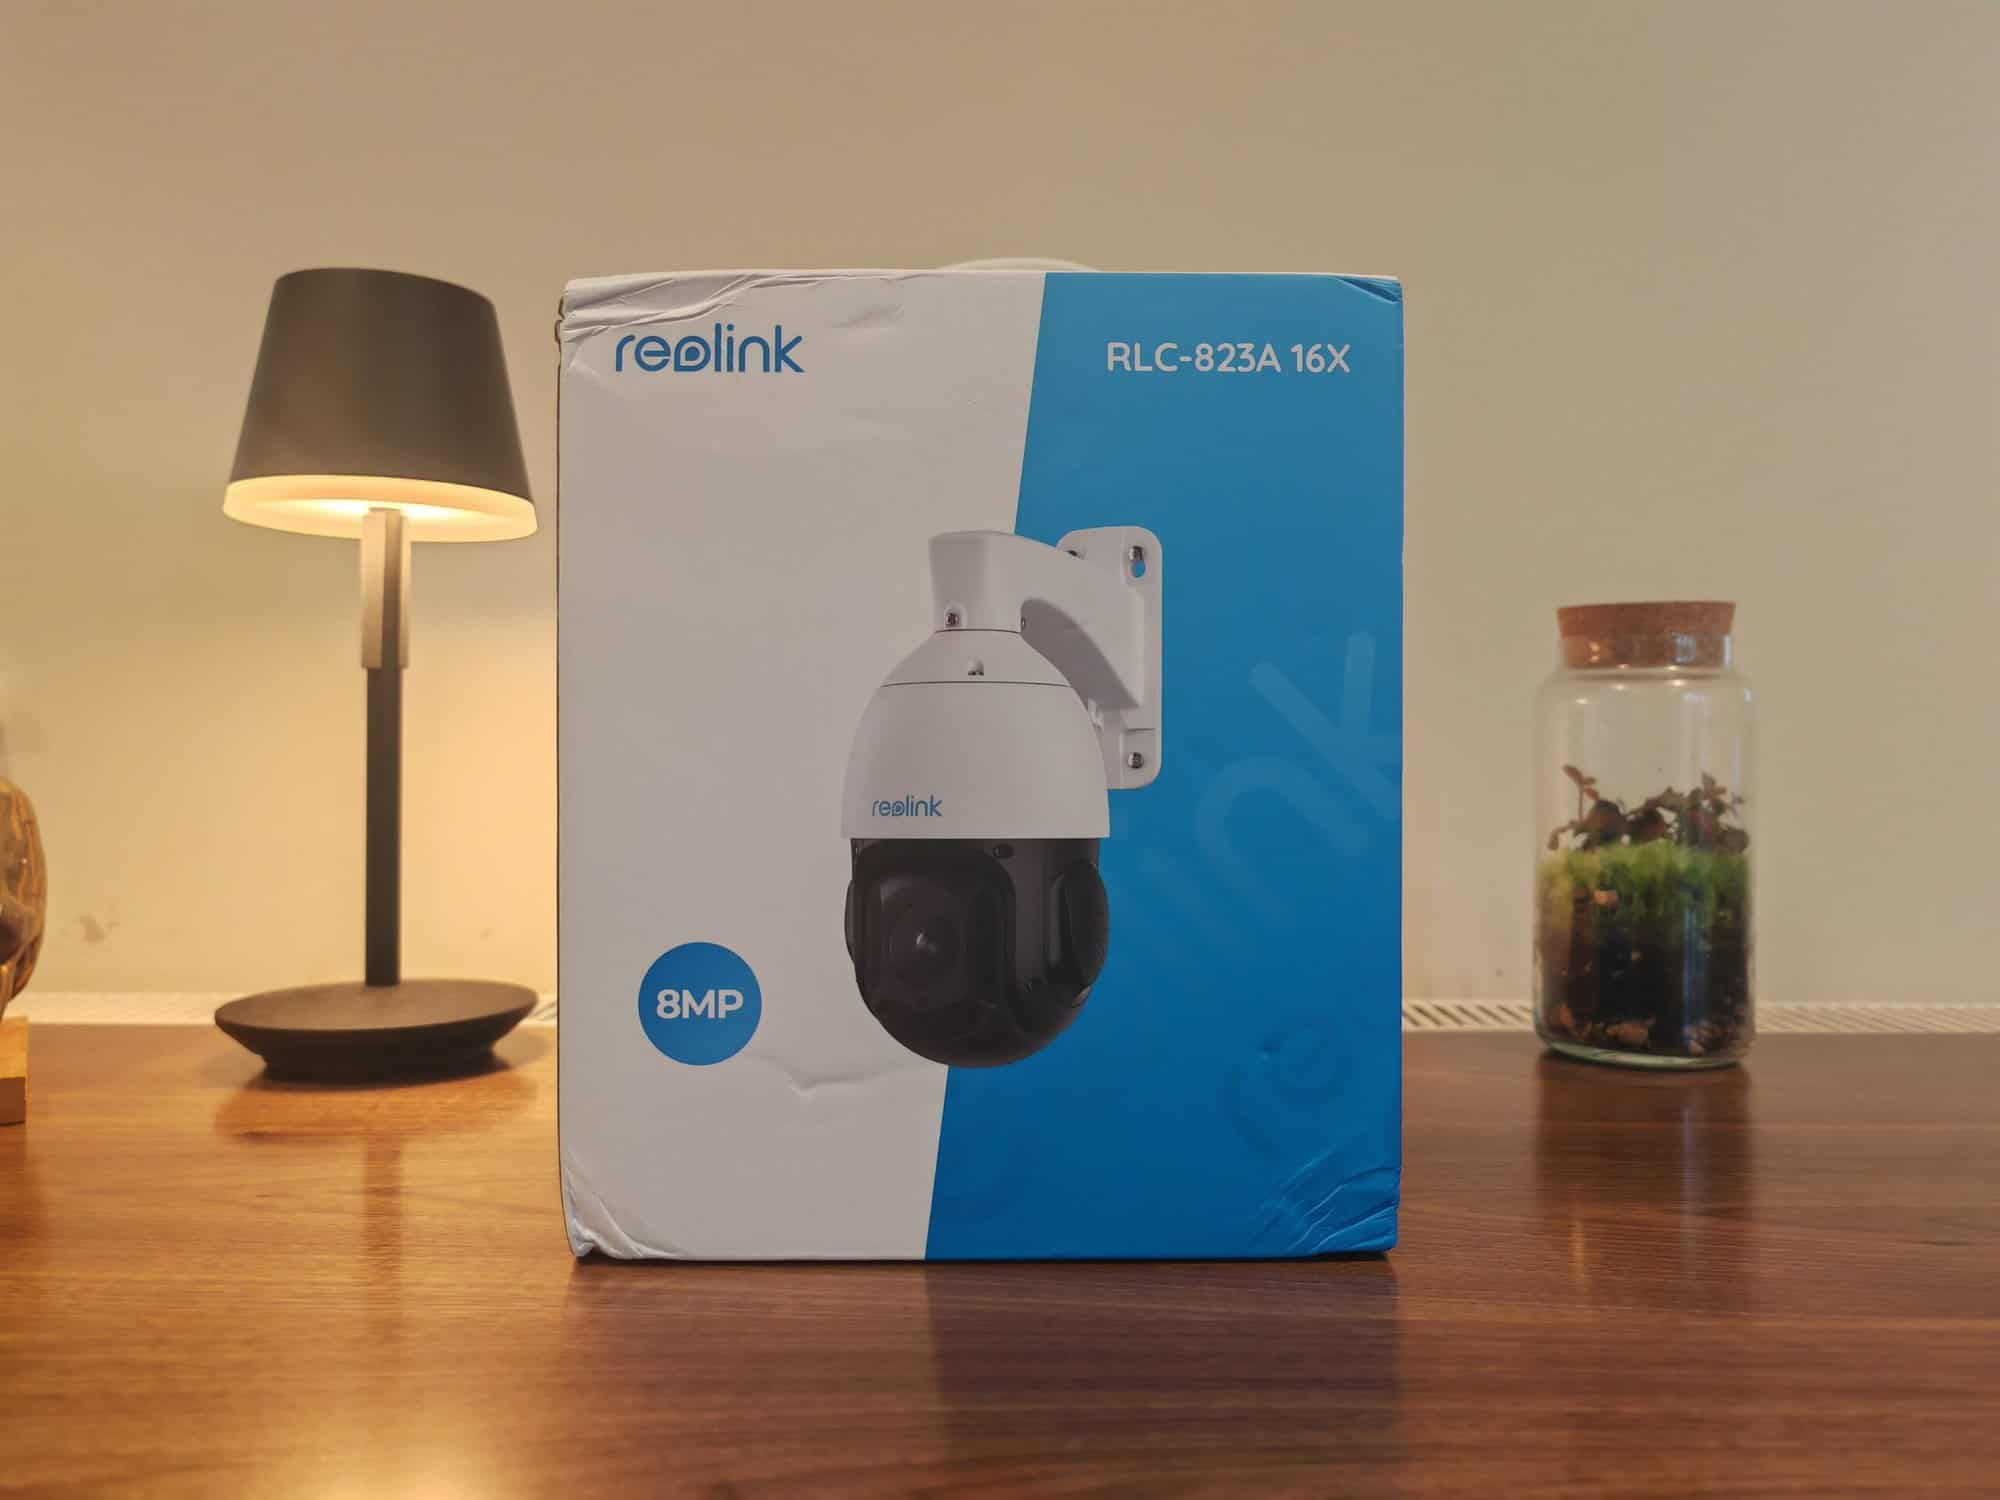 Reolink RLC-823A 16X Review: 4K PoE IP Camera with 16X PTZ